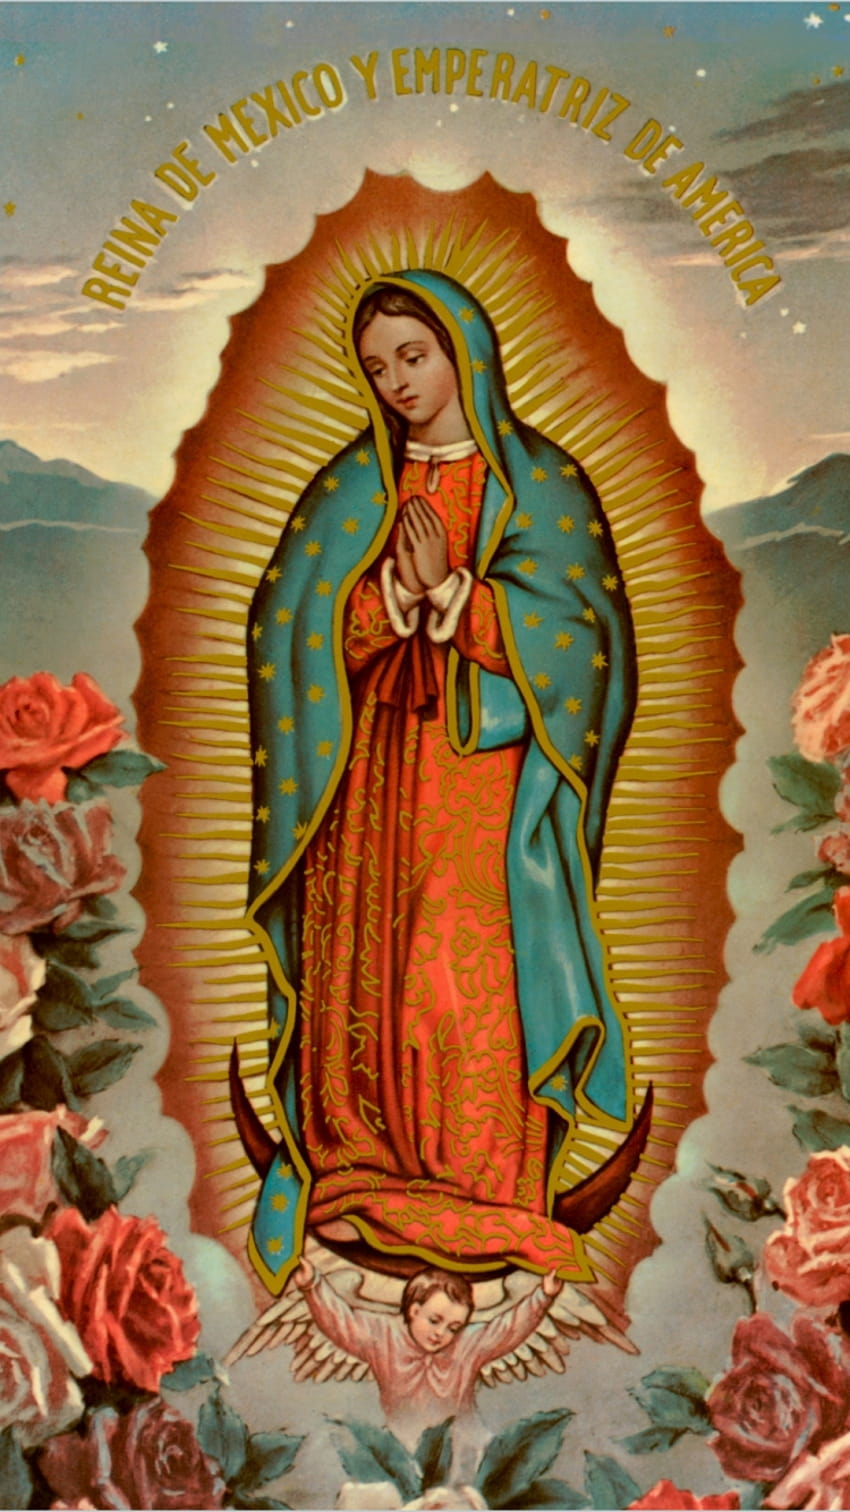 La Virgen De Guadalupe posted by Michelle Mercado, guadalupe iphone HD phone wallpaper